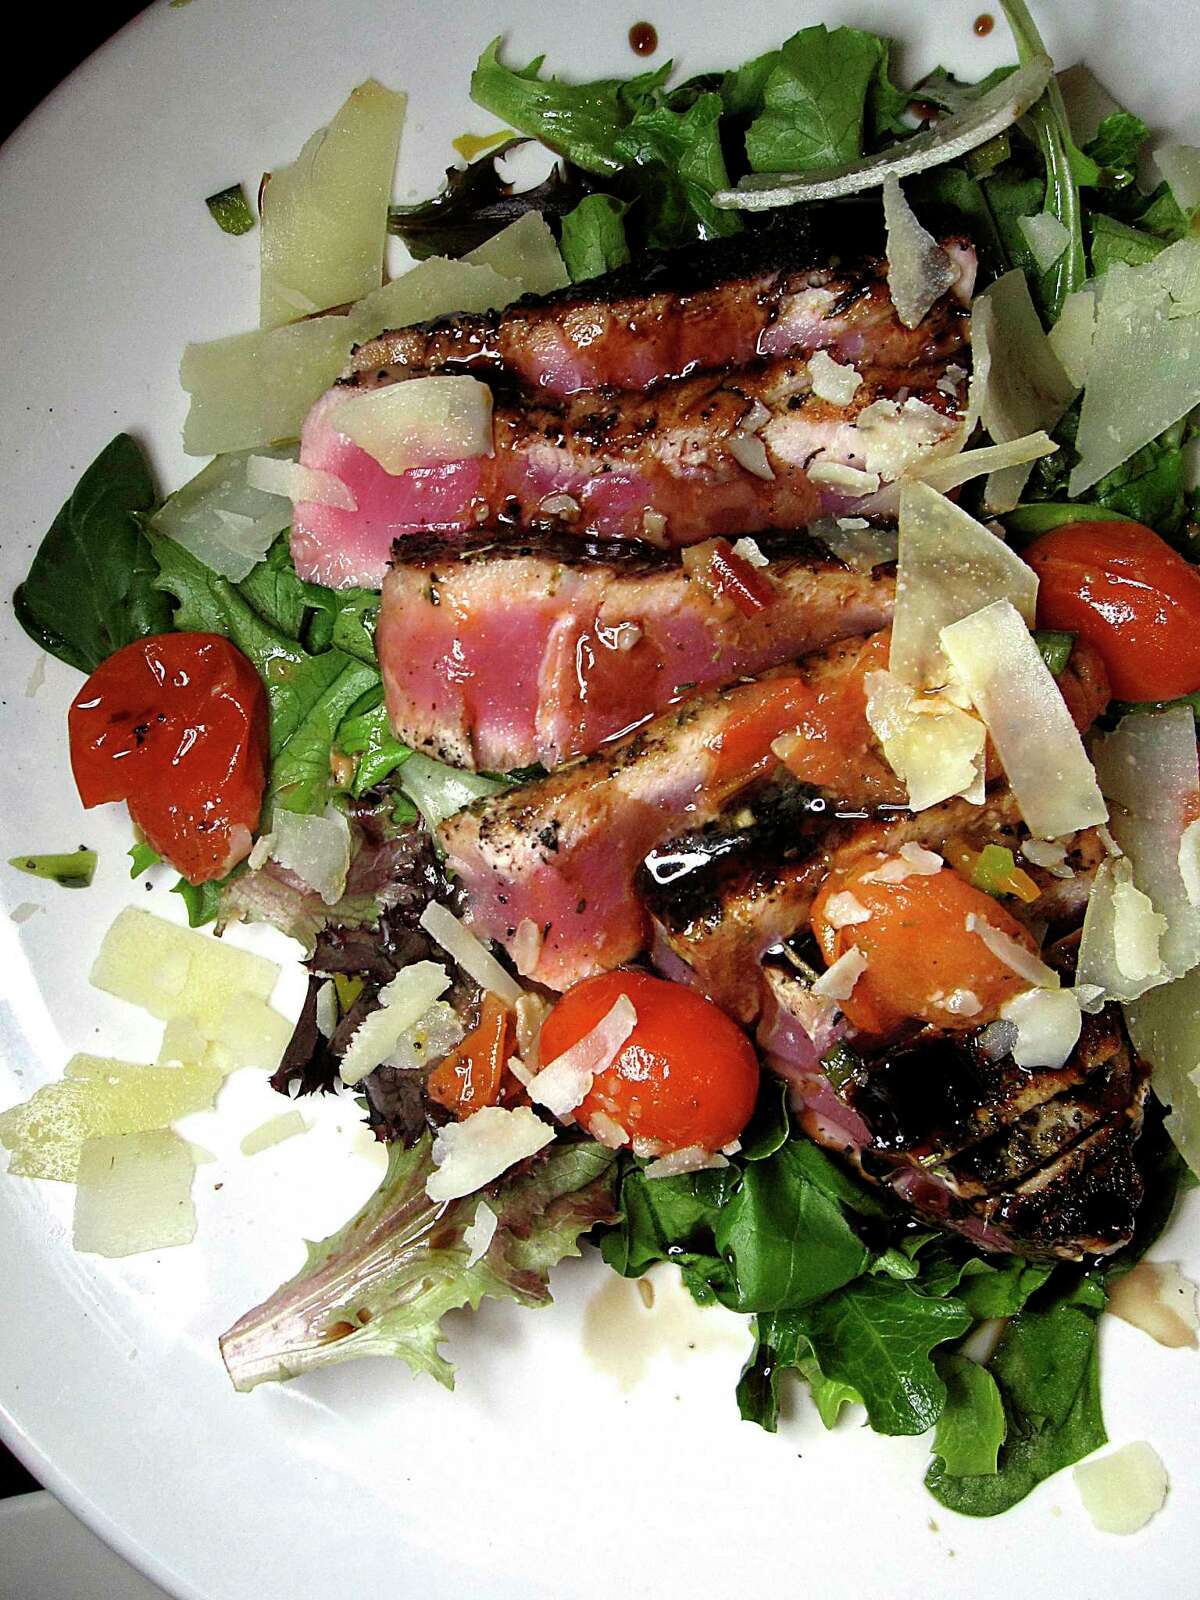 A pepper-crusted ahi tuna salad comes with avocado, tomato and honey soy vinaigrette at Iron Stag.